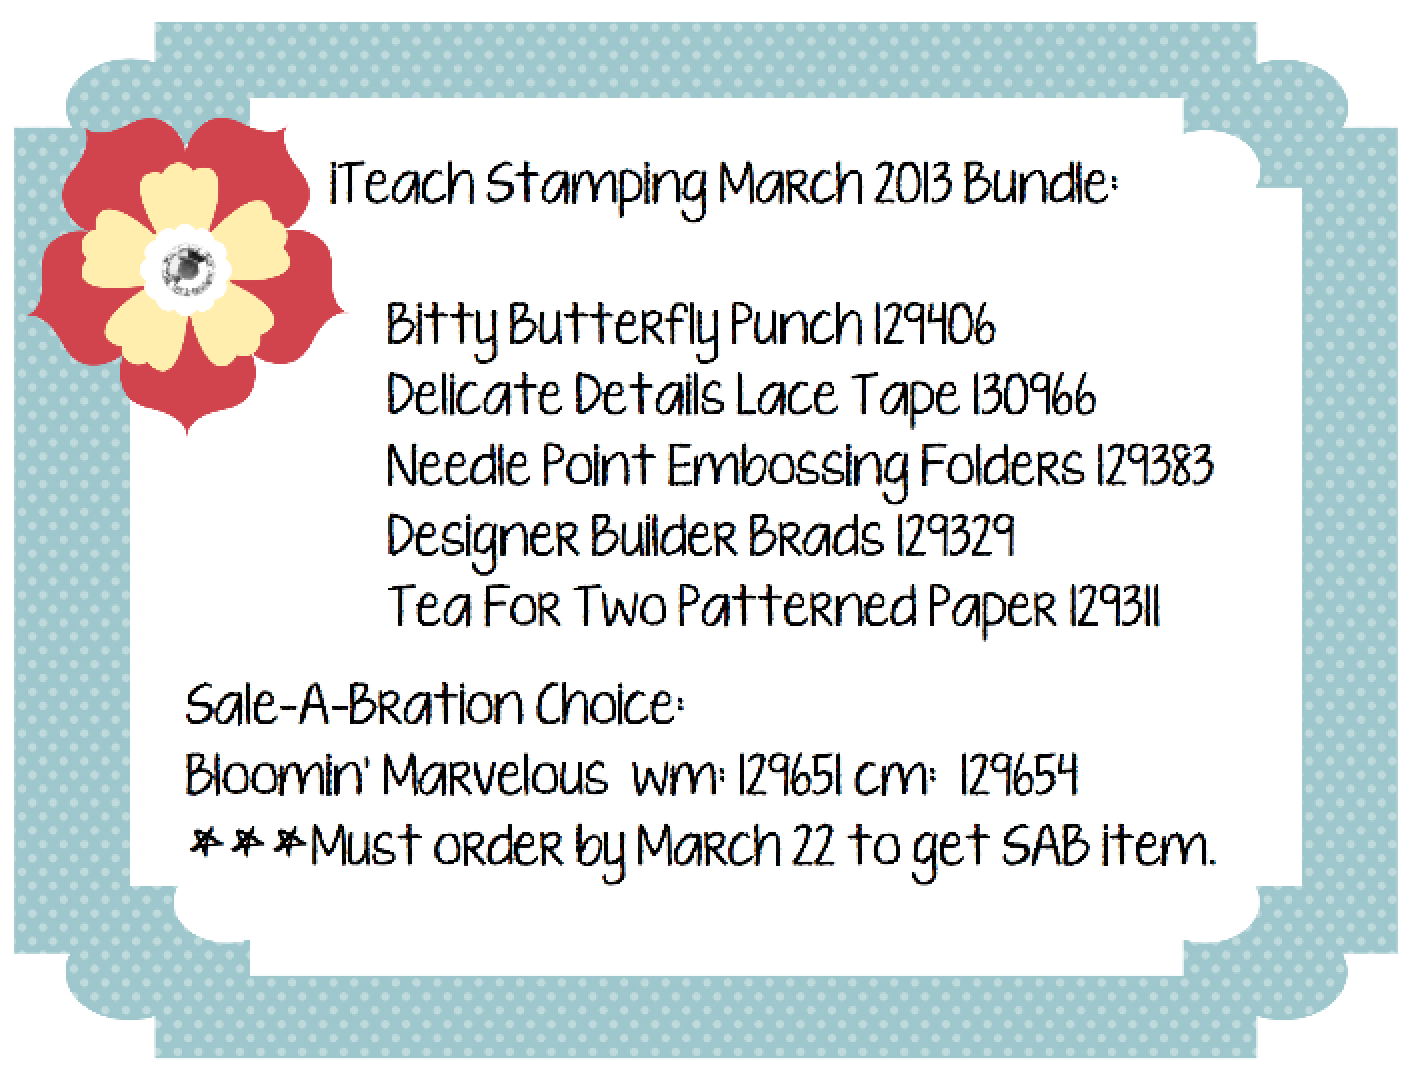 iTeach Stamping March 2013 Bundle